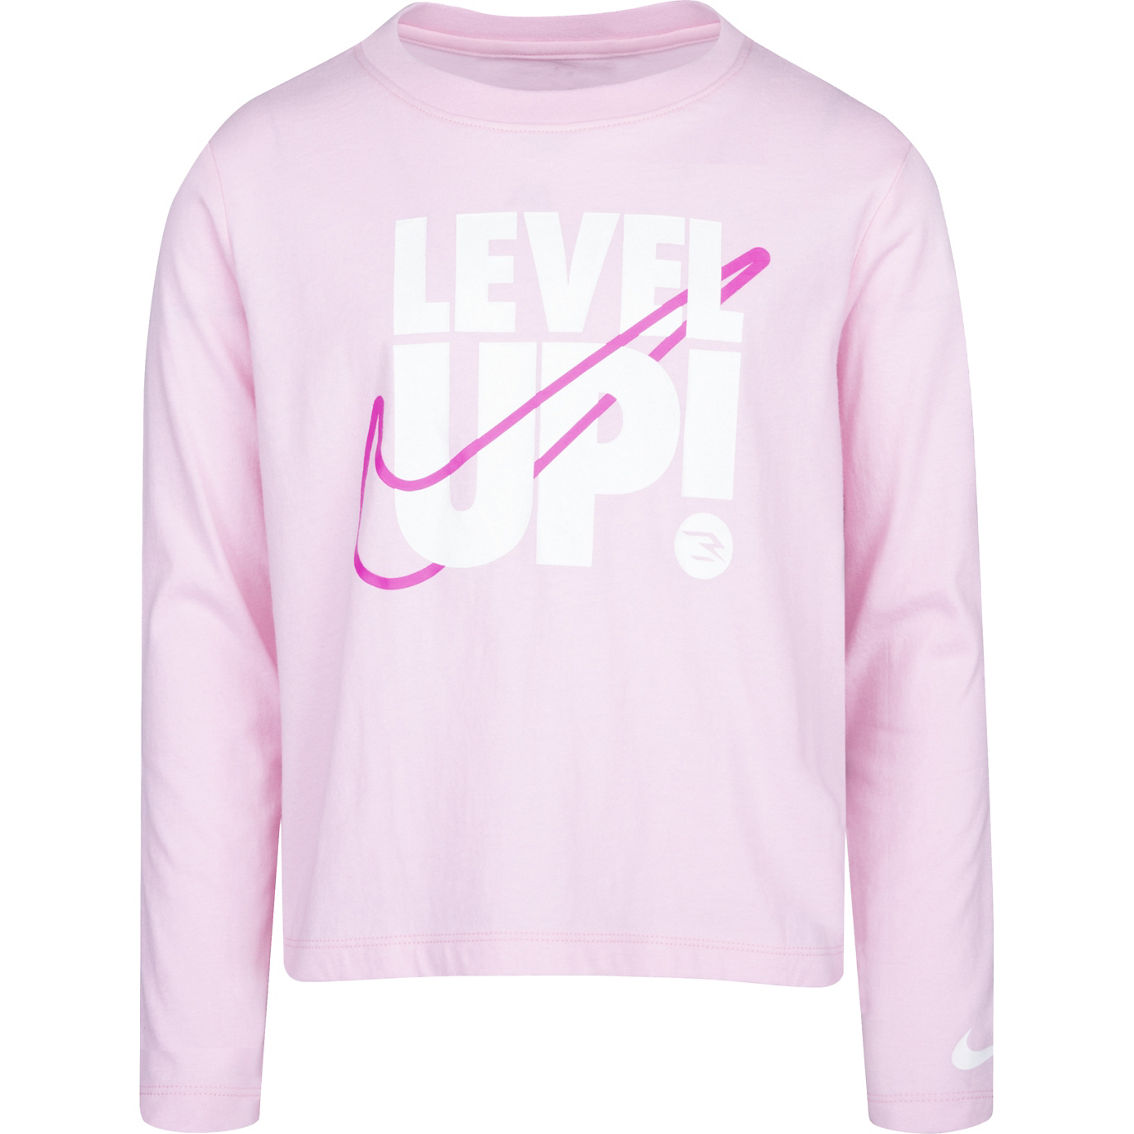 3Brand by Russell Wilson Girls Level Up Tee - Image 1 of 4